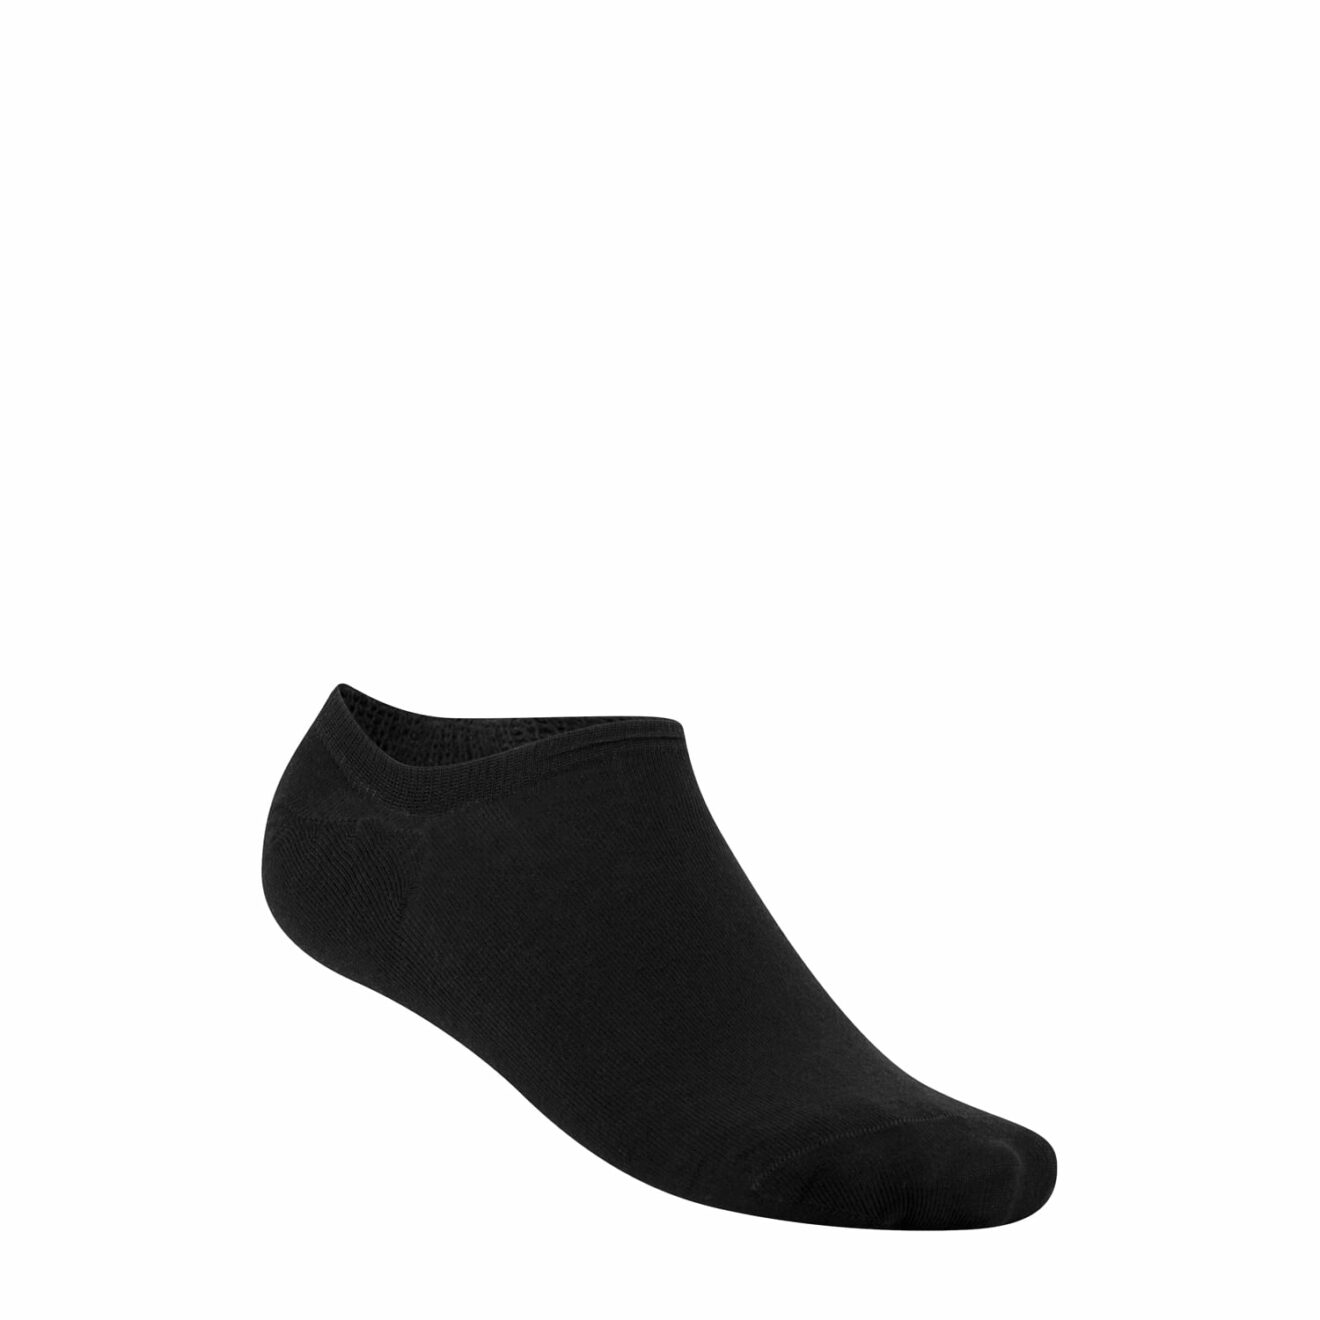 Bamocks Bamboo No Show Sneaker Chaussettes 4 paires Noir